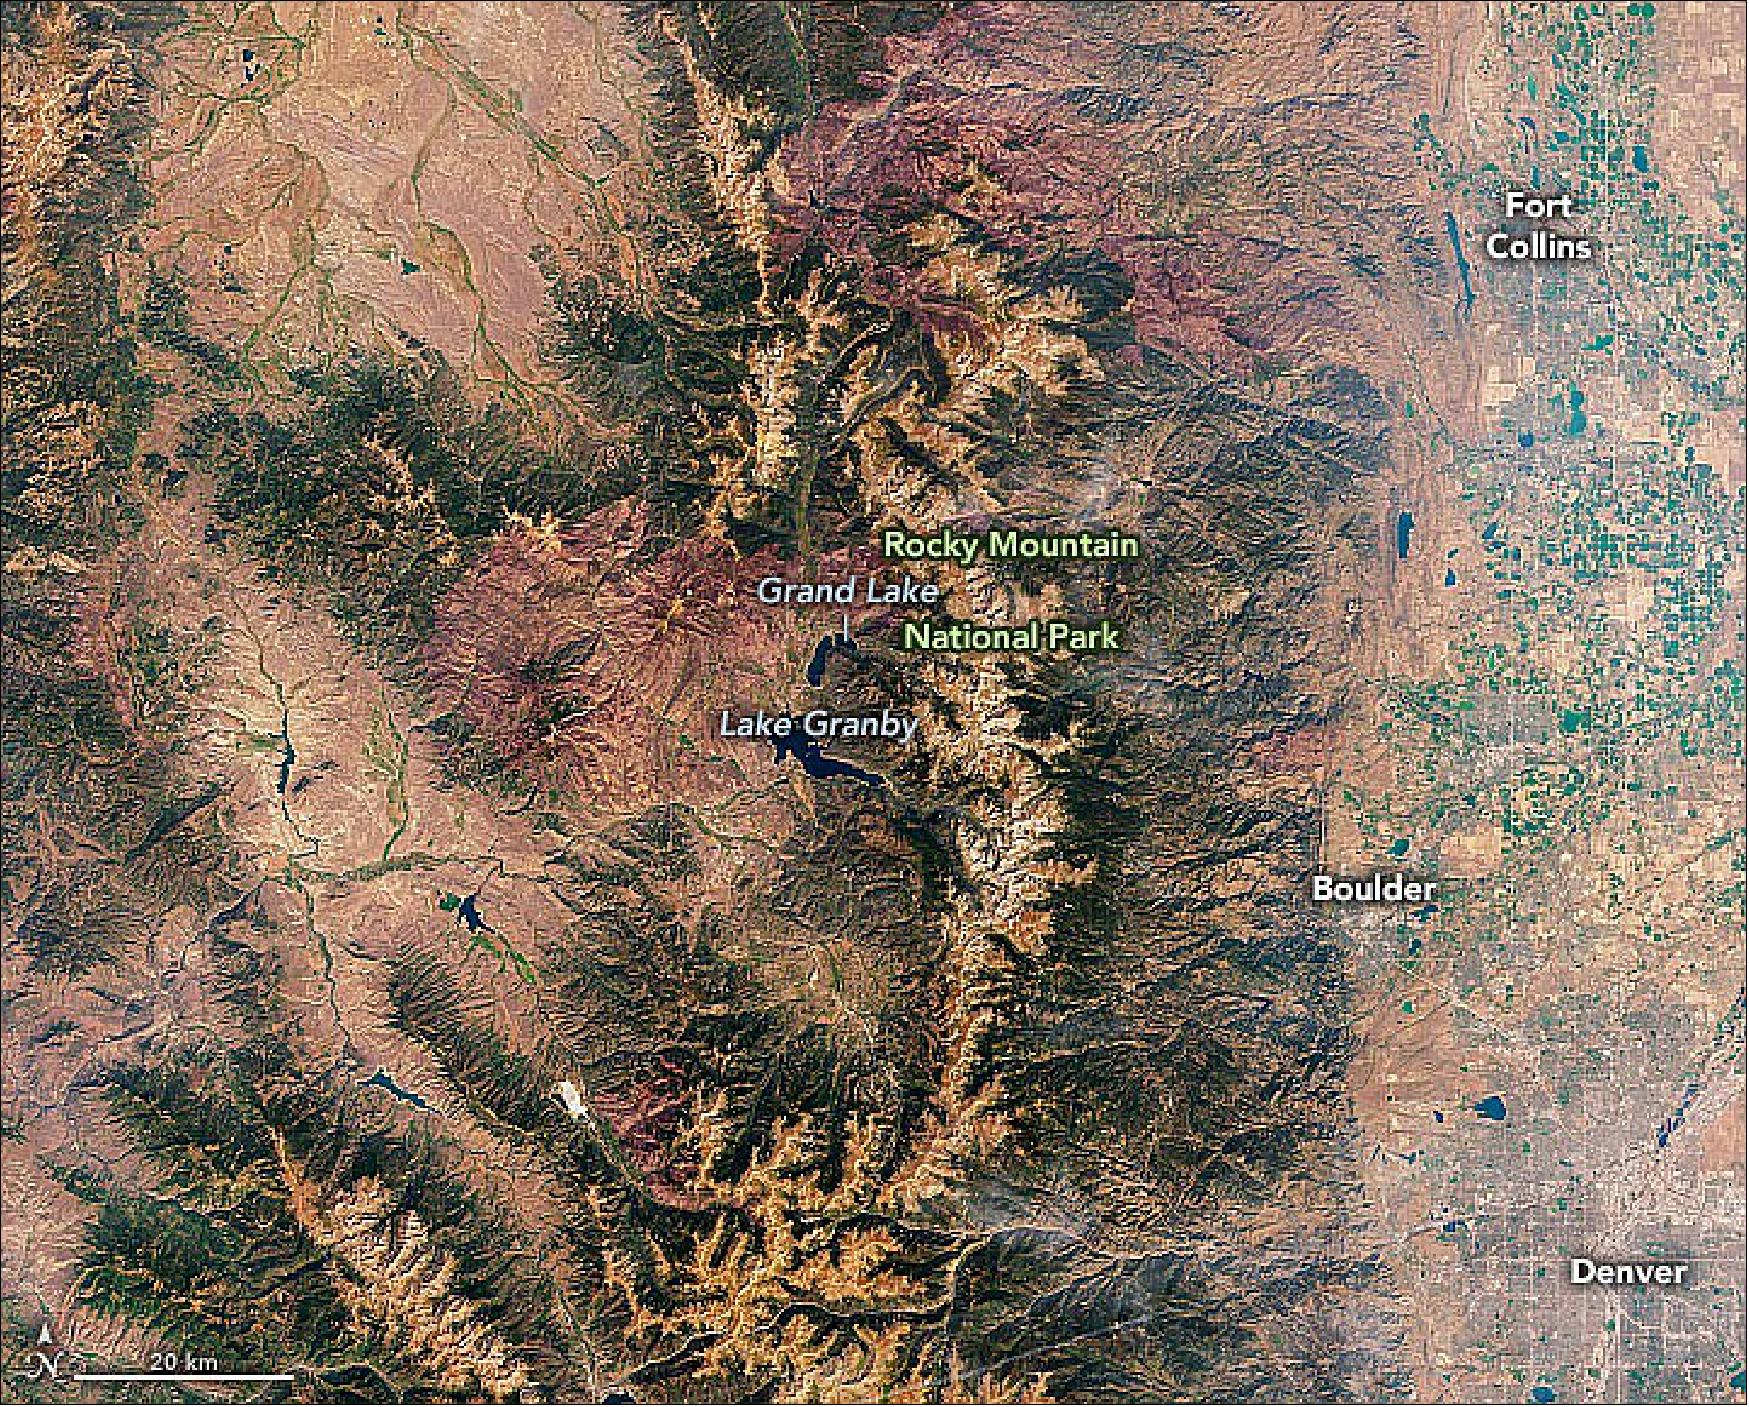 Figure 32: Landsat-8 image of the continental divide in Colorado. Snowmelt and runoff collected in Lake Granby is pumped to a canal that flows into Shadow Mountain Reservoir and Grand Lake, where it enters the West Portal of the Adams tunnel. Upon exiting the East Portal, the water flows into the Wind River toward Mary’s Lake, then proceeds through other tunnels and canals to multiple Front Range reservoirs. Between the West and East portals, the tunnel’s elevation drops 109 feet (33 meters). Driven by the force of gravity, water flows through the tunnel at a rate of 550 cubic feet (15.5 m3/s) — traveling the length of the tunnel in about two hours (image credit: NASA Earth Observatory)